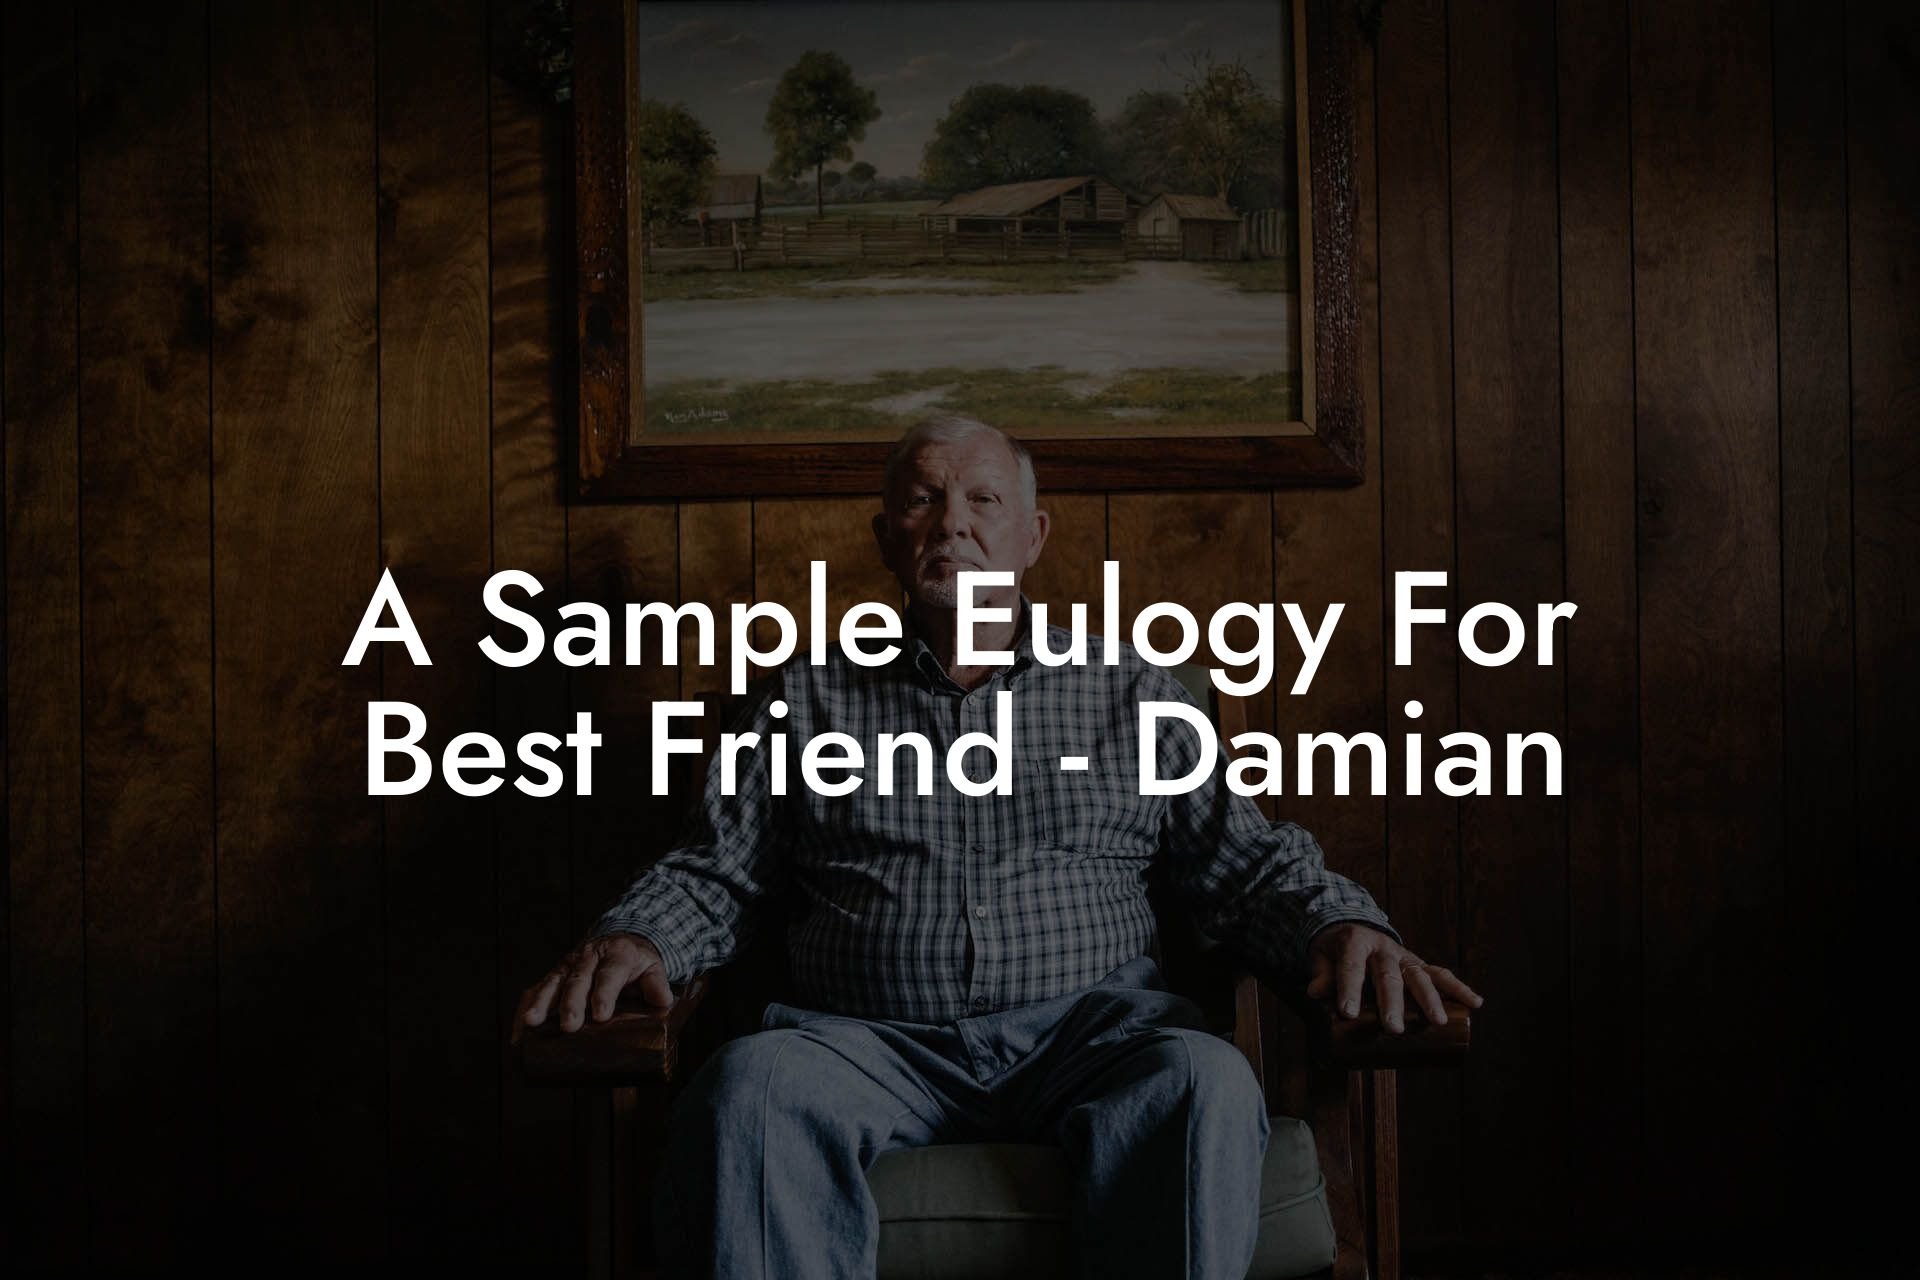 A Sample Eulogy For Best Friend - Damian